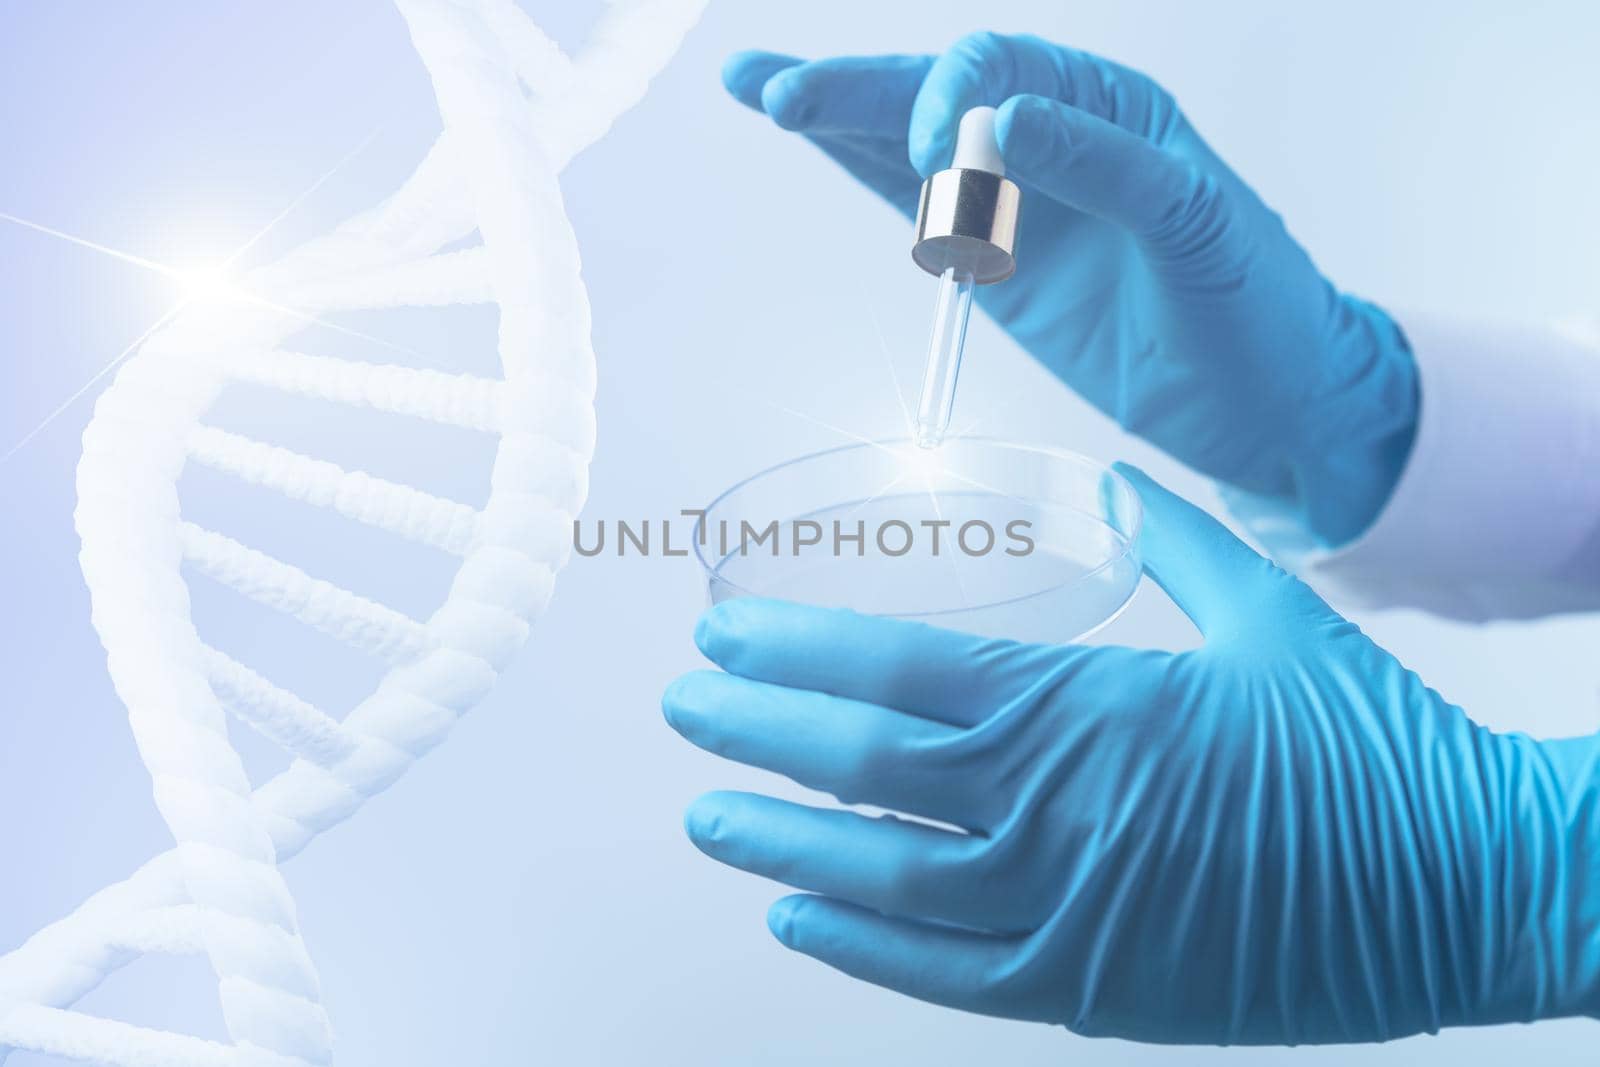 Scientist hand holding a petri dish with DNA, scientific background. 3d rendering.